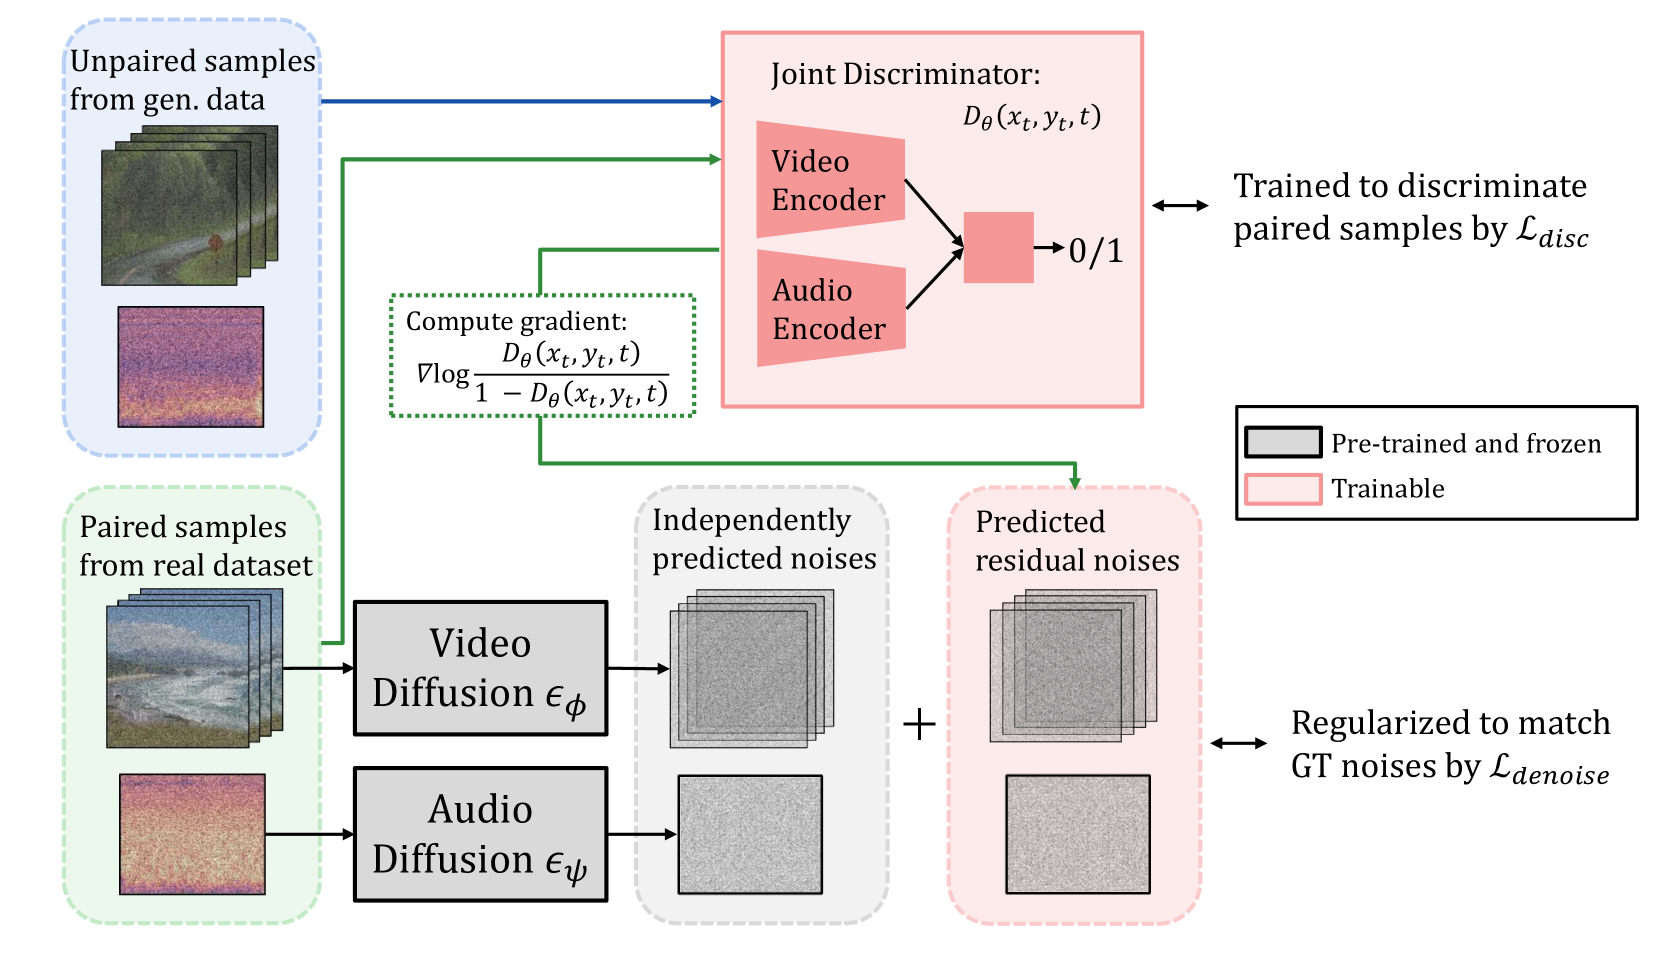 Discriminator-Guided Cooperative Diffusion for Joint Audio and Video Generation